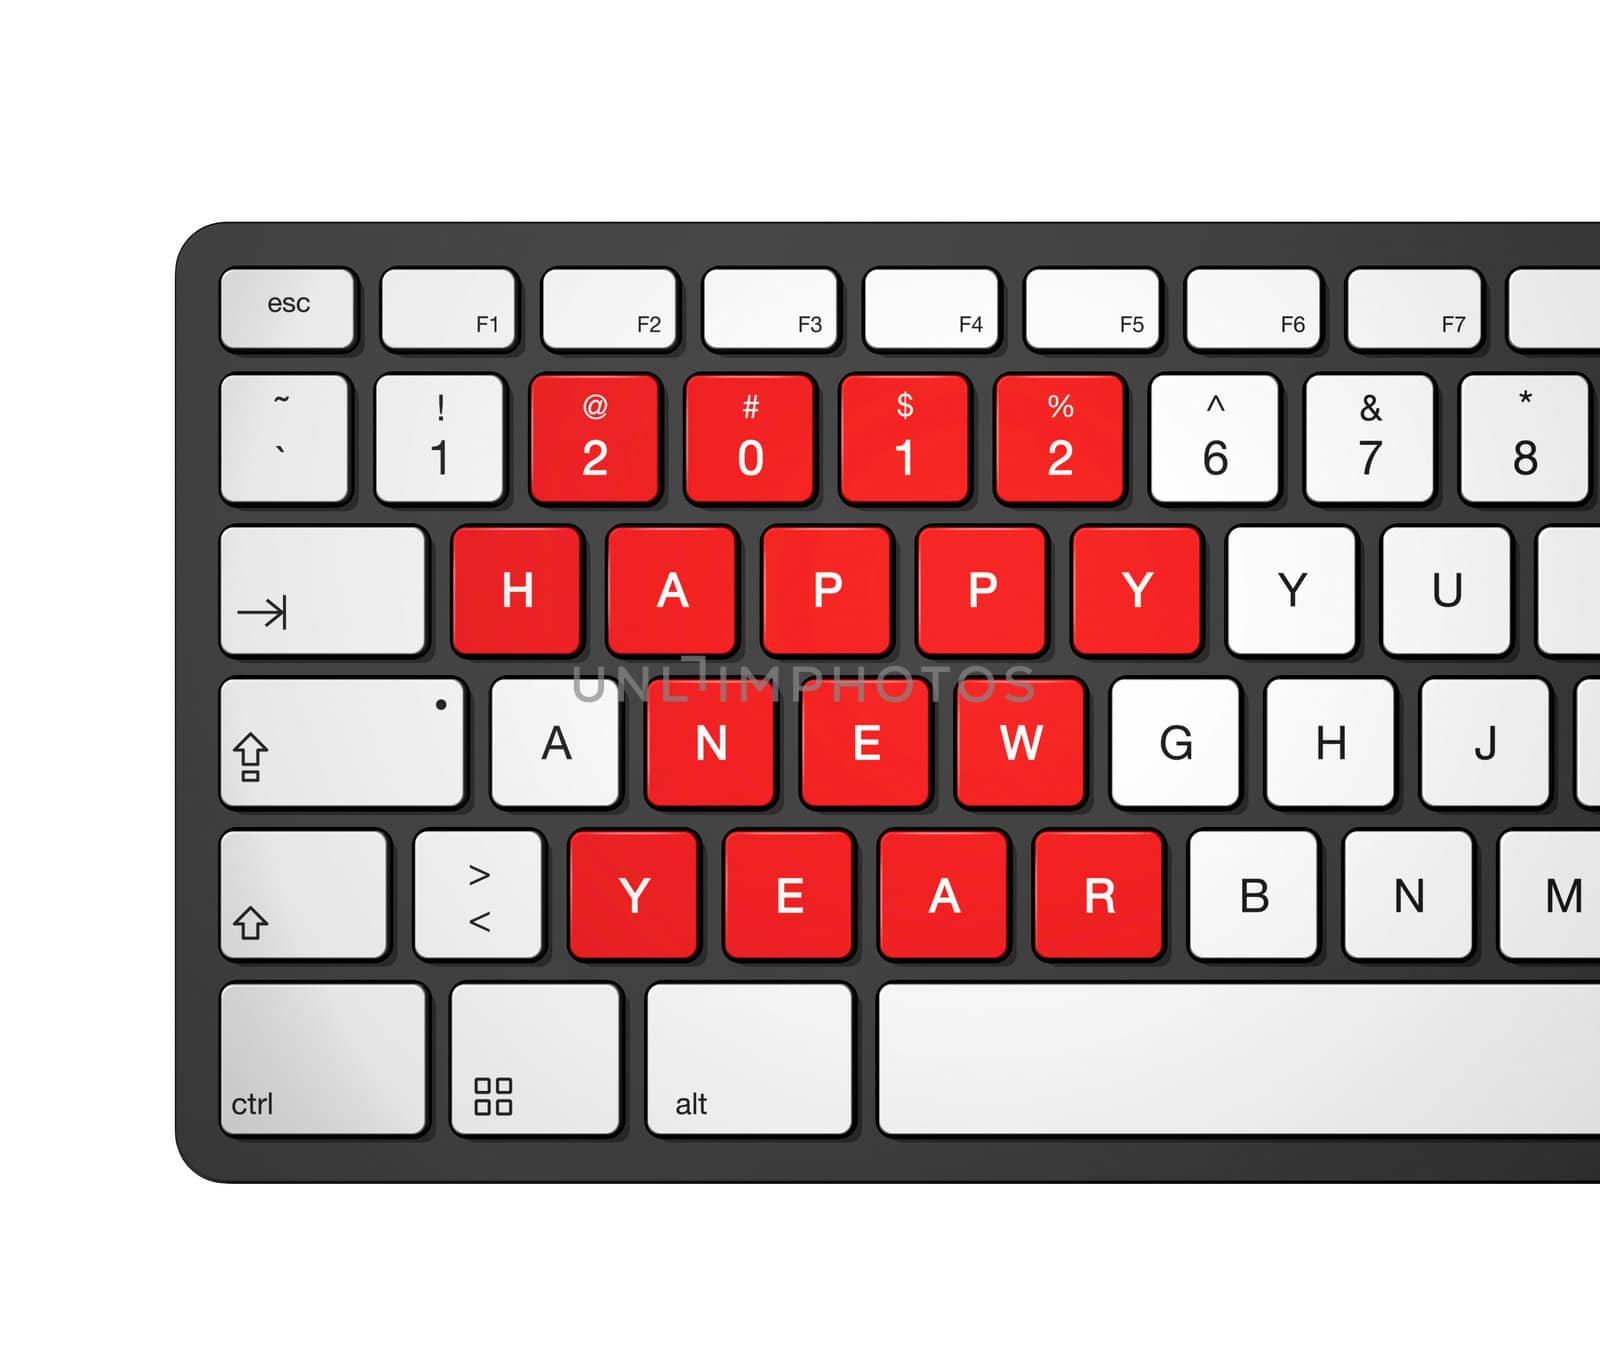 New year 2012 computer keyboard by daboost